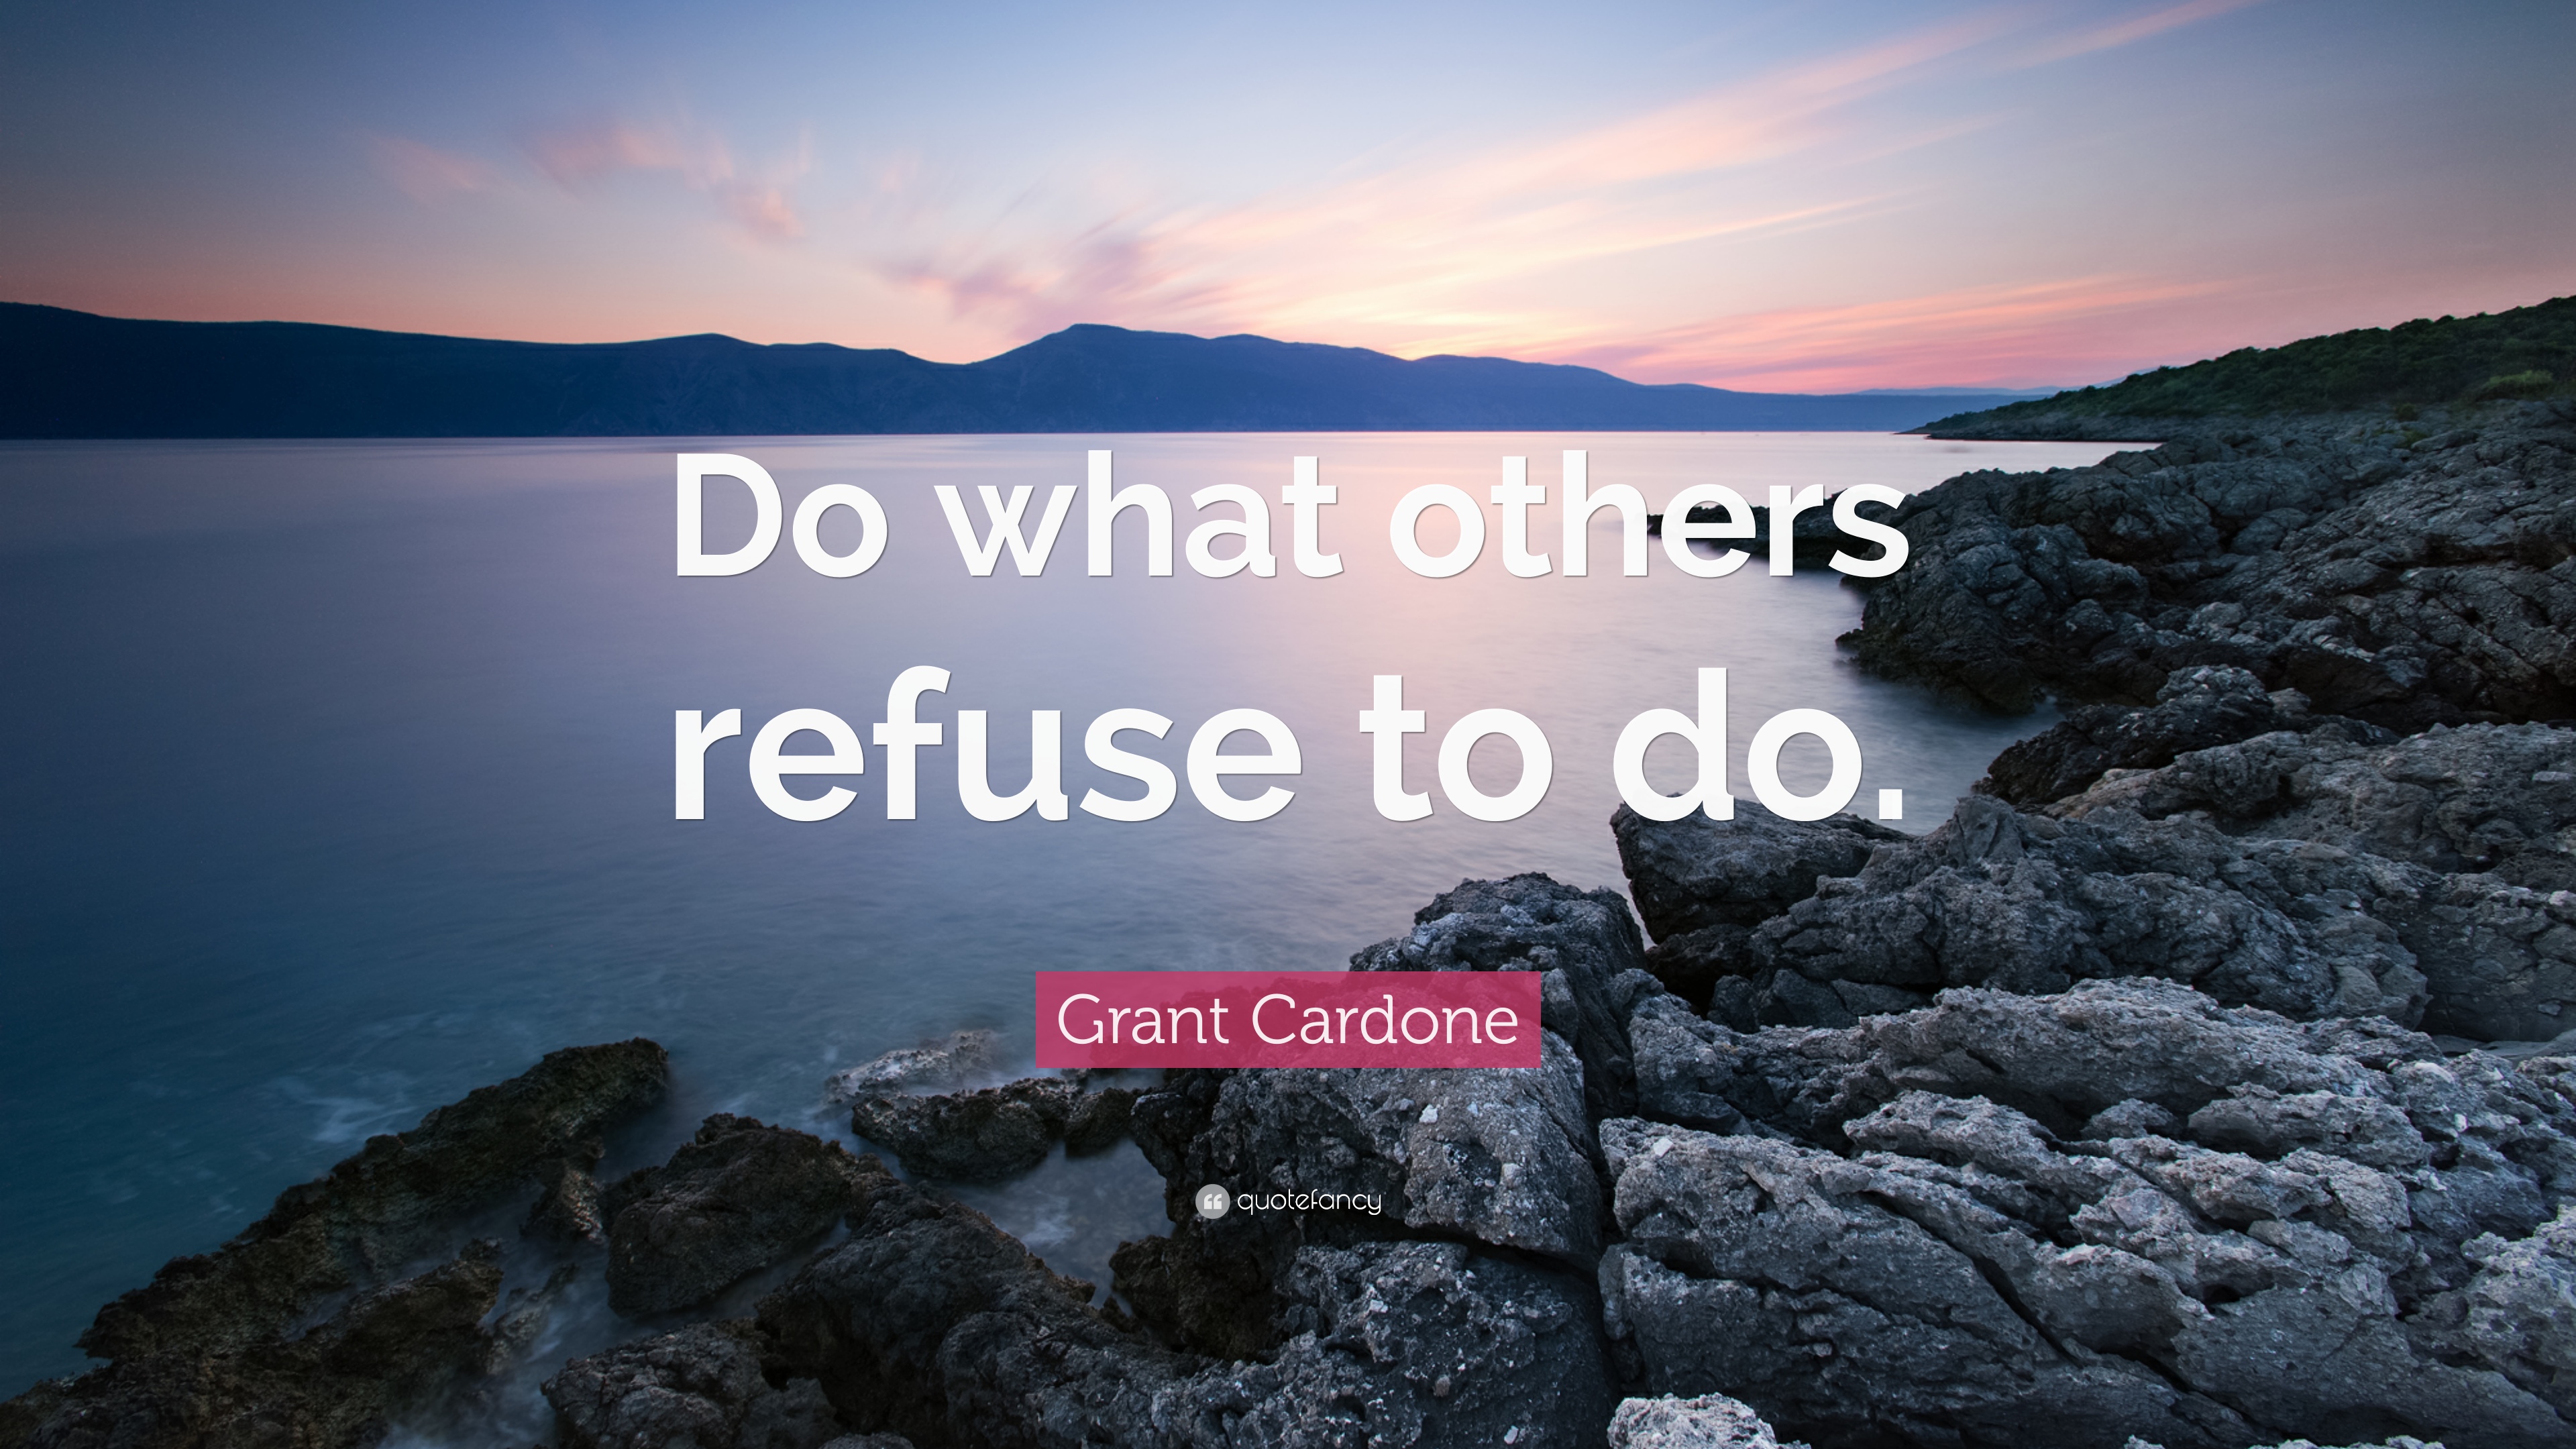 Grant Cardone Quote: “Do what others refuse to do.” 12